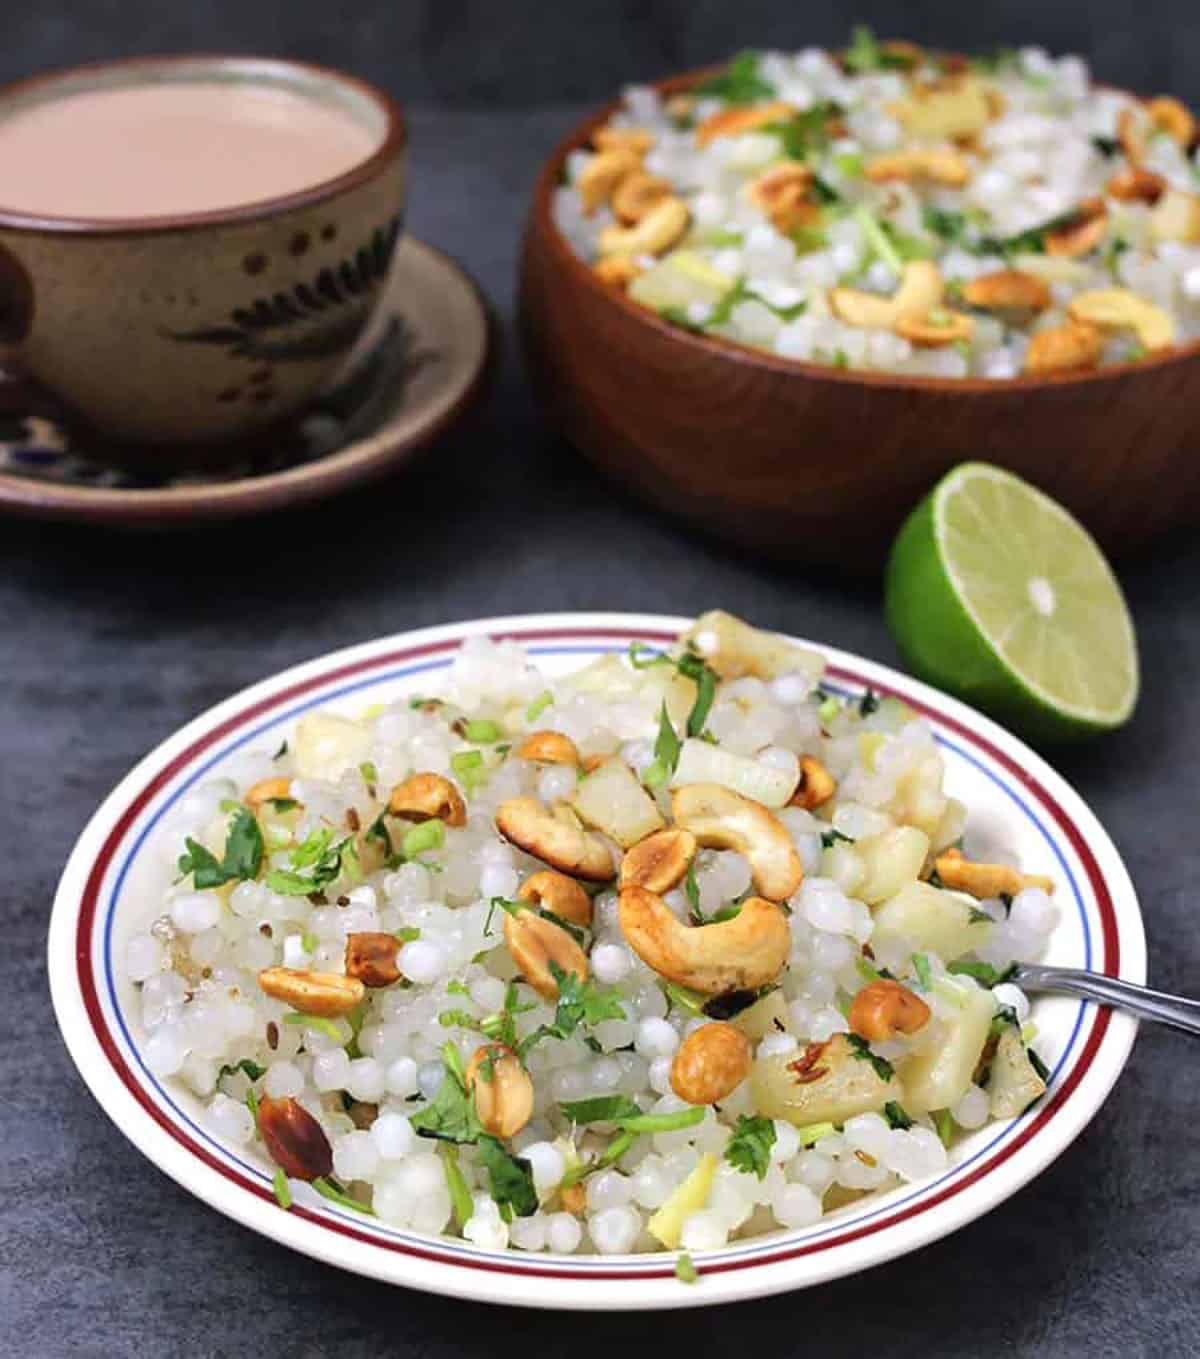 Plate of sabudana khichdi garnished with roasted cashews and peanuts, with a cut of tea, and half of a lime.